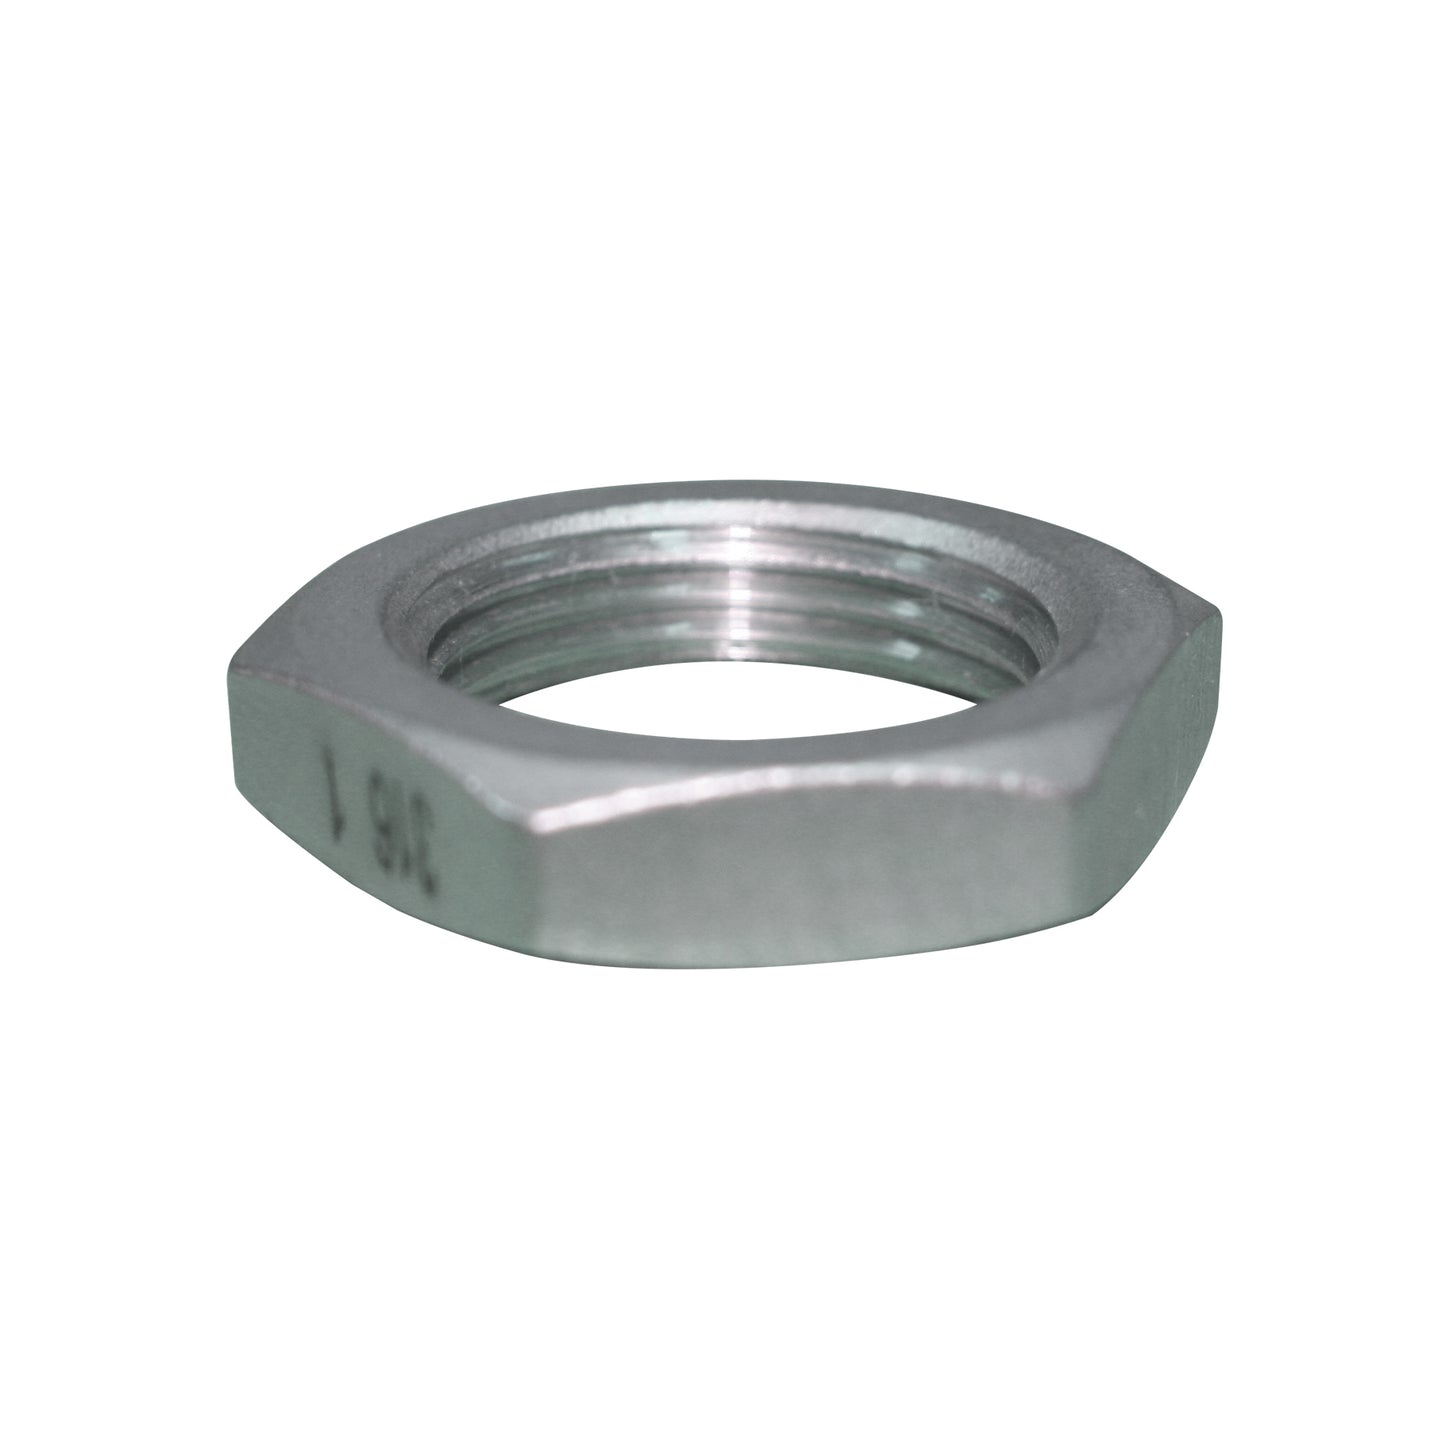 1 1 2 stainless steel back nut ss150